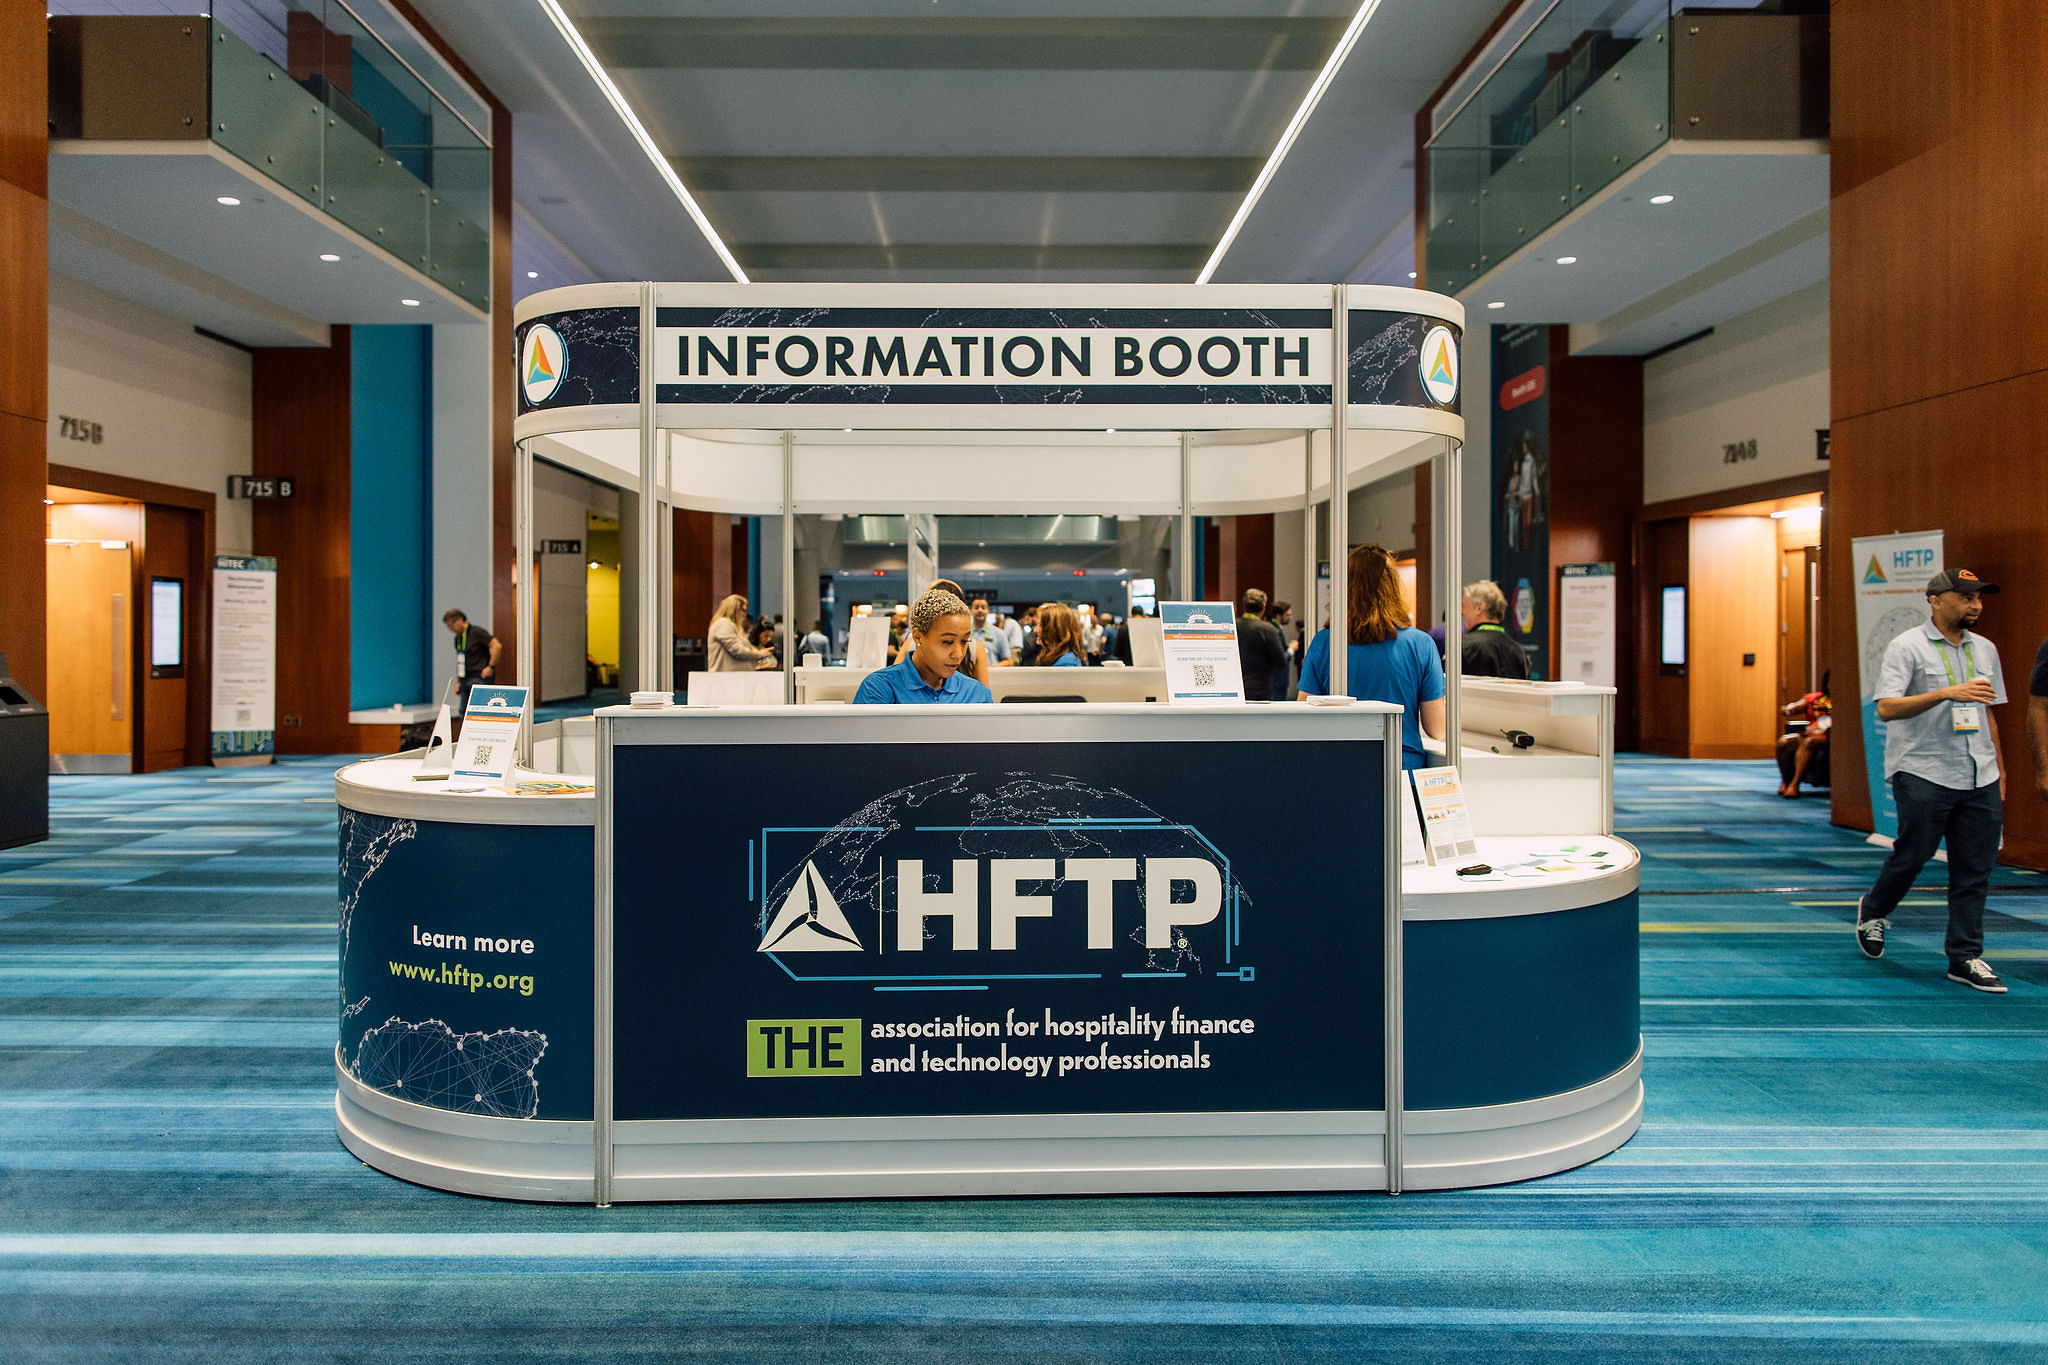 Hftp booth at the conference